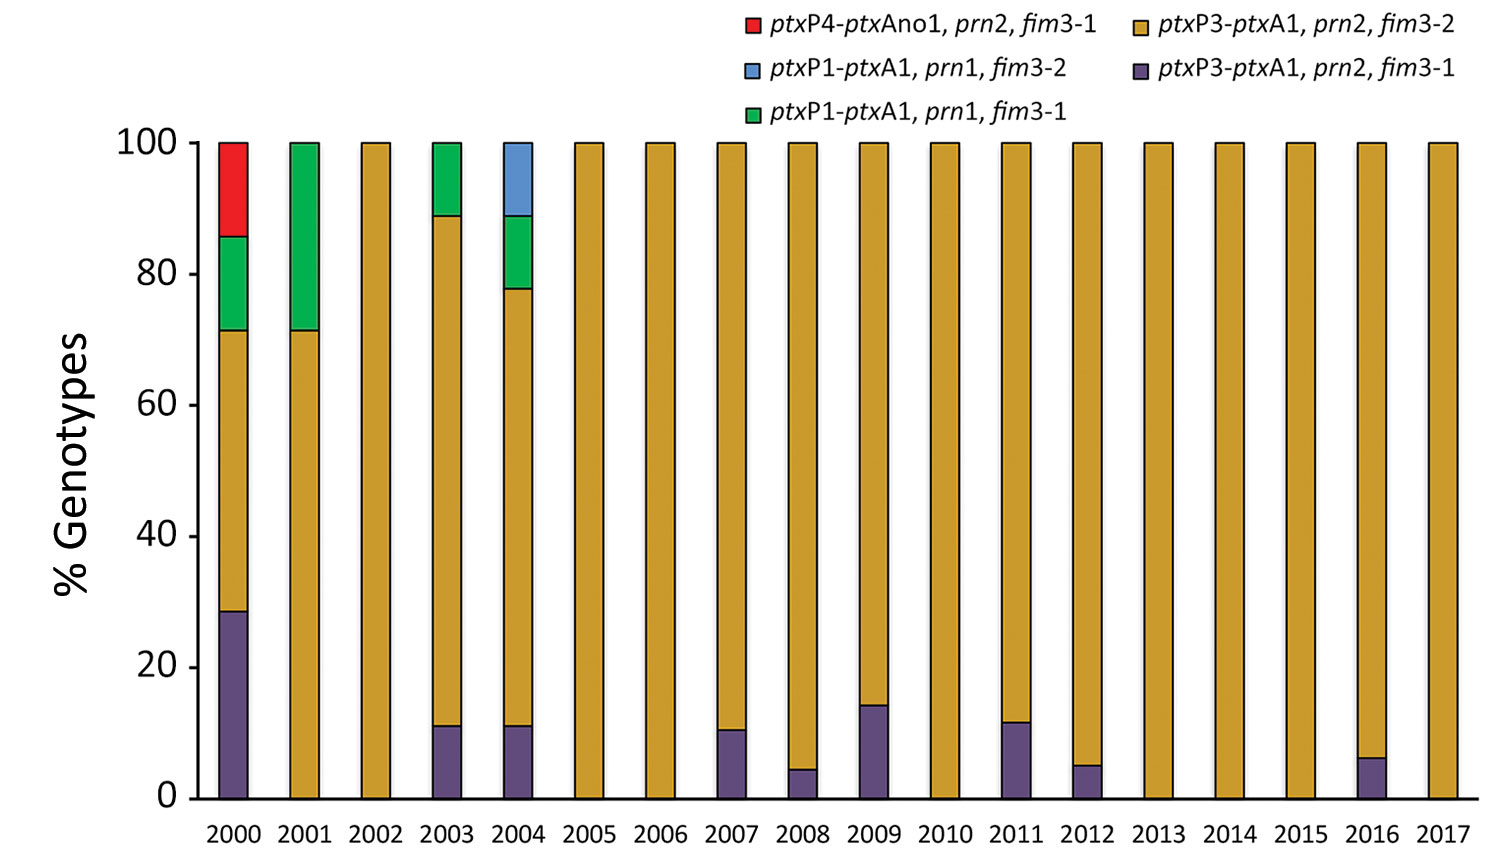 Percentage of multilocus sequence typing genotypes of Bordetella pertussis among isolates collected in Buenos Aires, Argentina, 2000–2017. fim, fimbriae; prn, pertactin; ptxA, pertussis toxin subunit A, ptxP, pertussis toxin promoter.